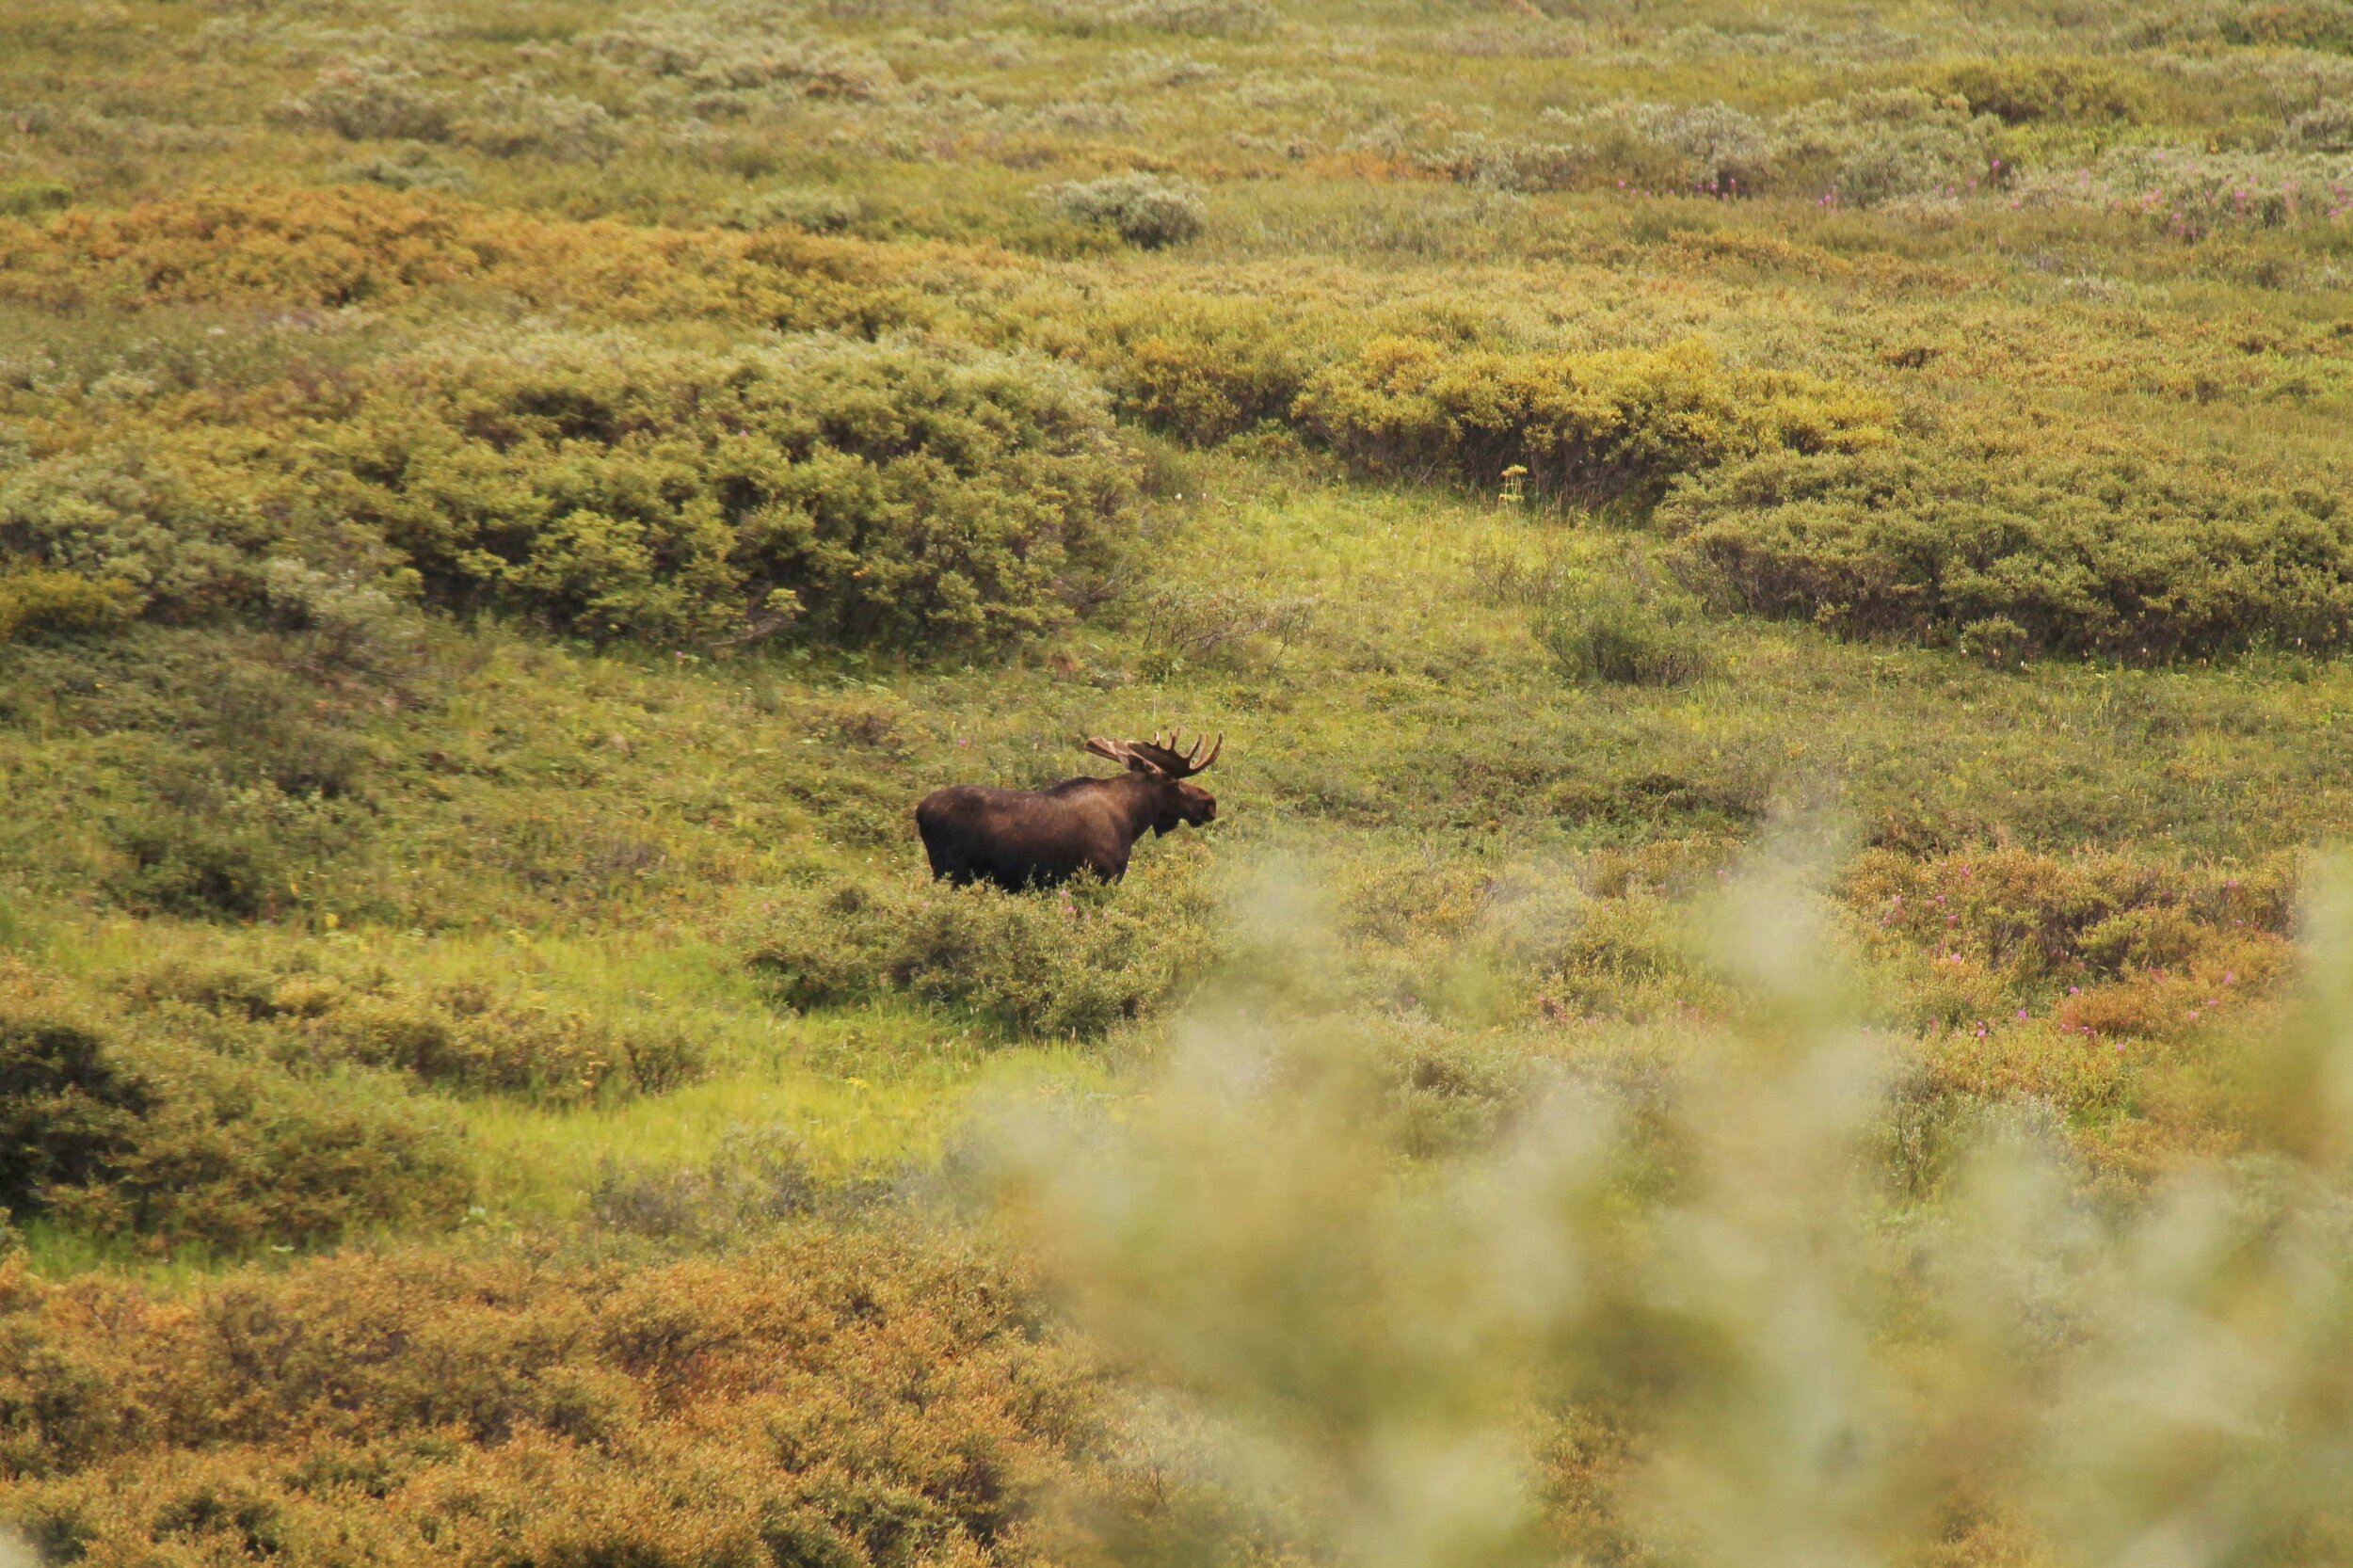  A male moose with antlers standing in a sea of green vegetation.  